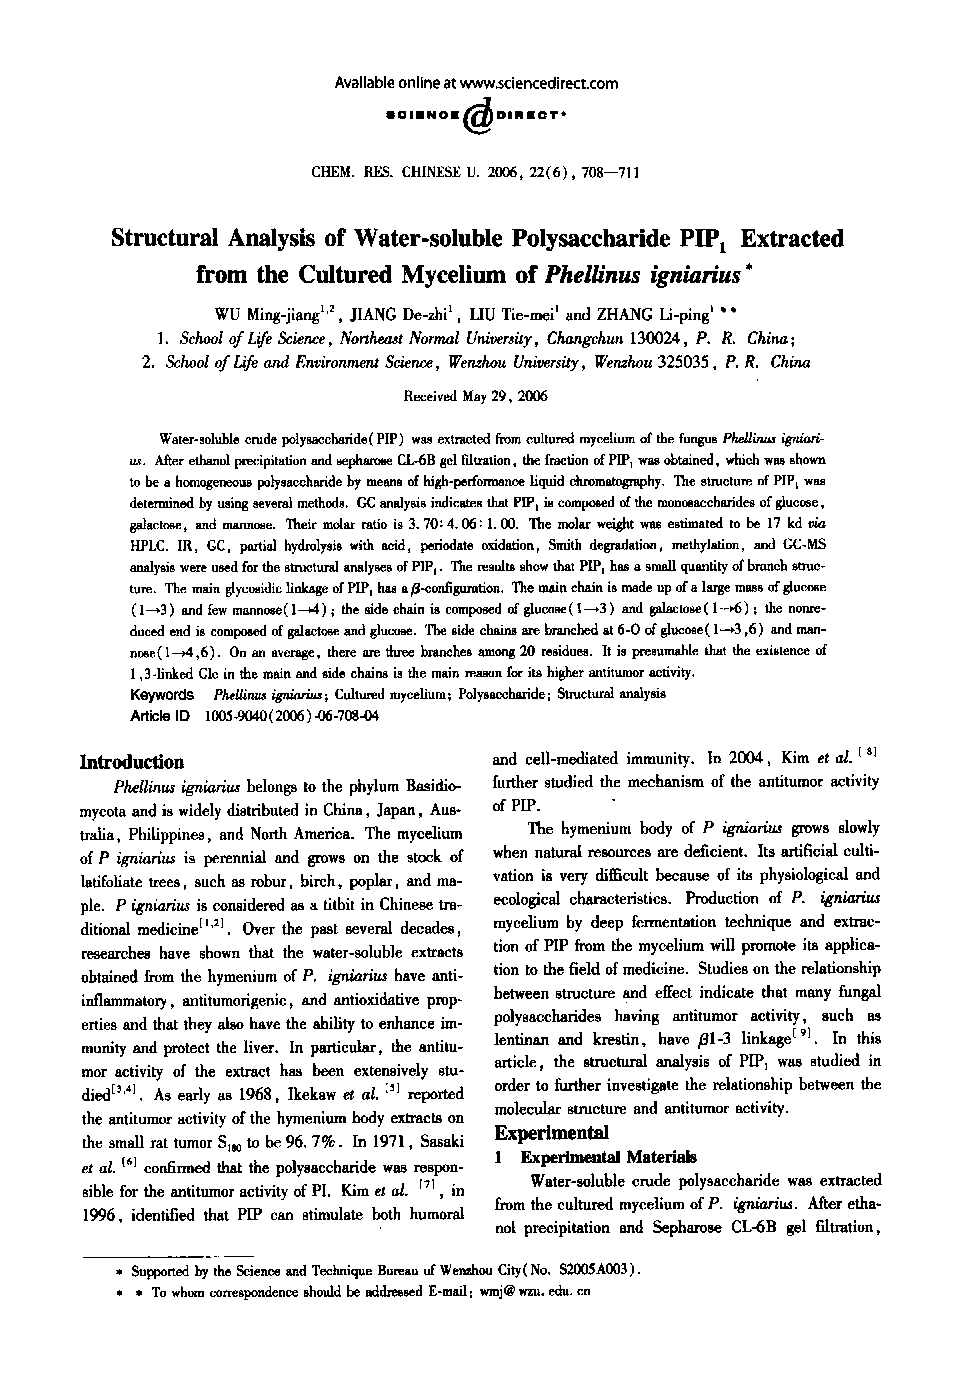 Structural Analysis of Water-soluble Polysaccharide PIP1 Extracted from the Cultured Mycelium of Phellinus igniarius1
		